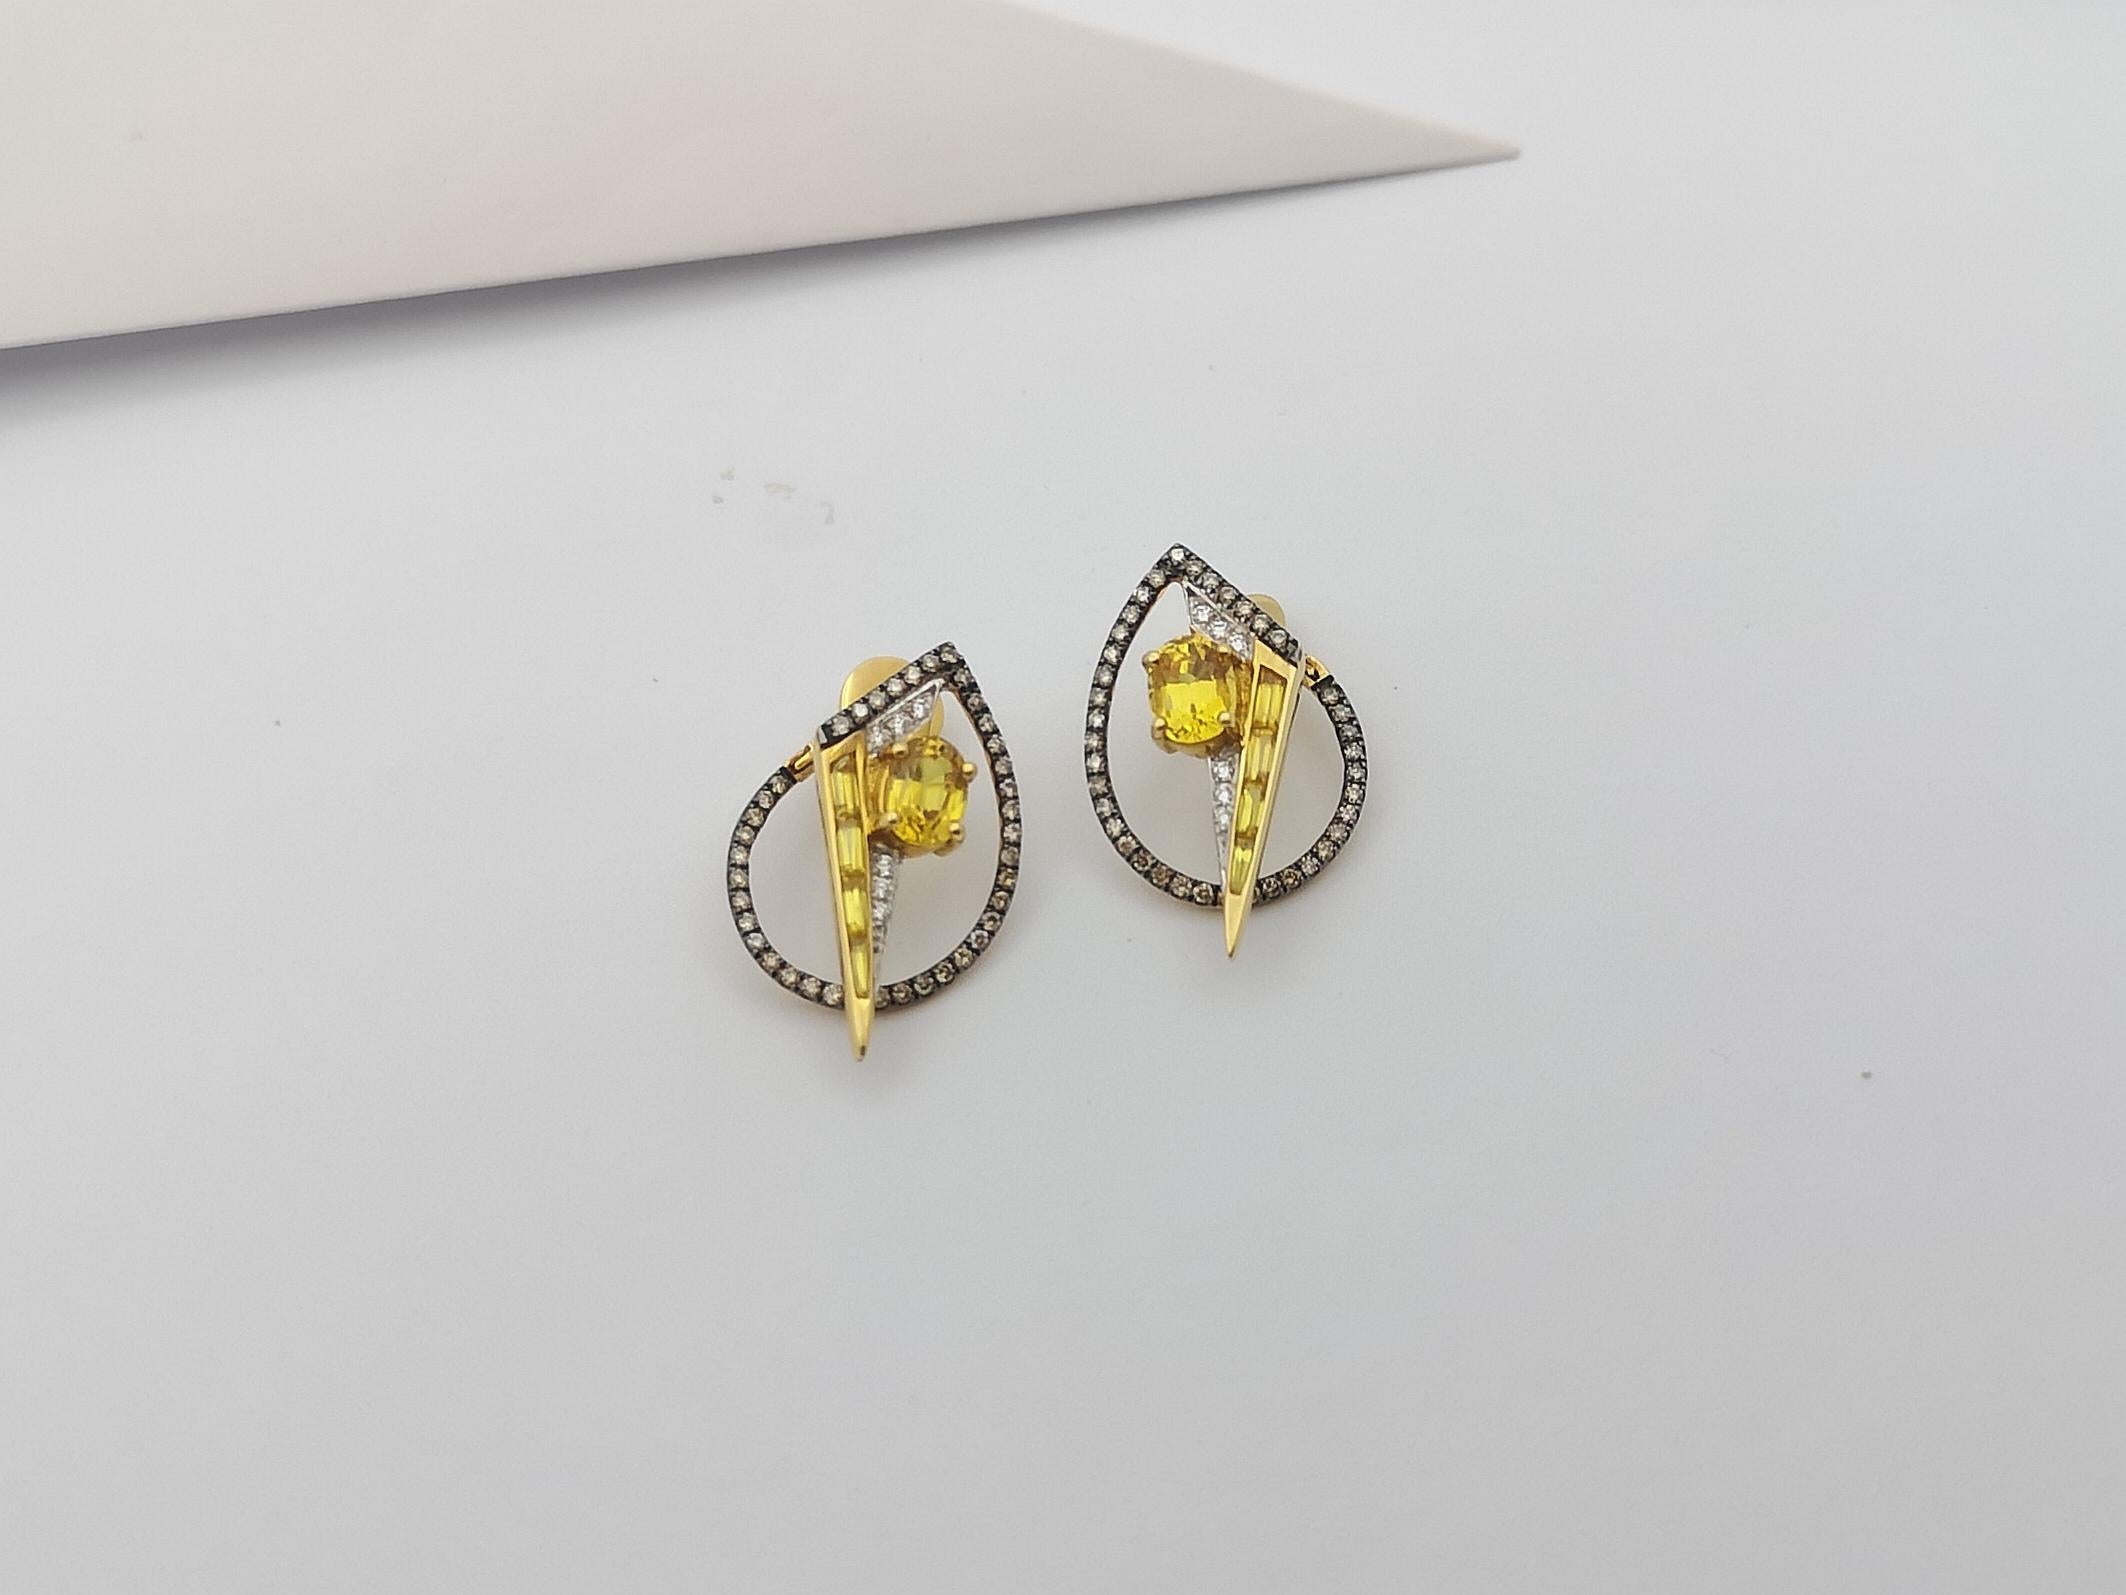 Mixed Cut Yellow Sapphire, Diamond, Brown Diamond Earrings in 18K Gold by Kavant & Sharart For Sale